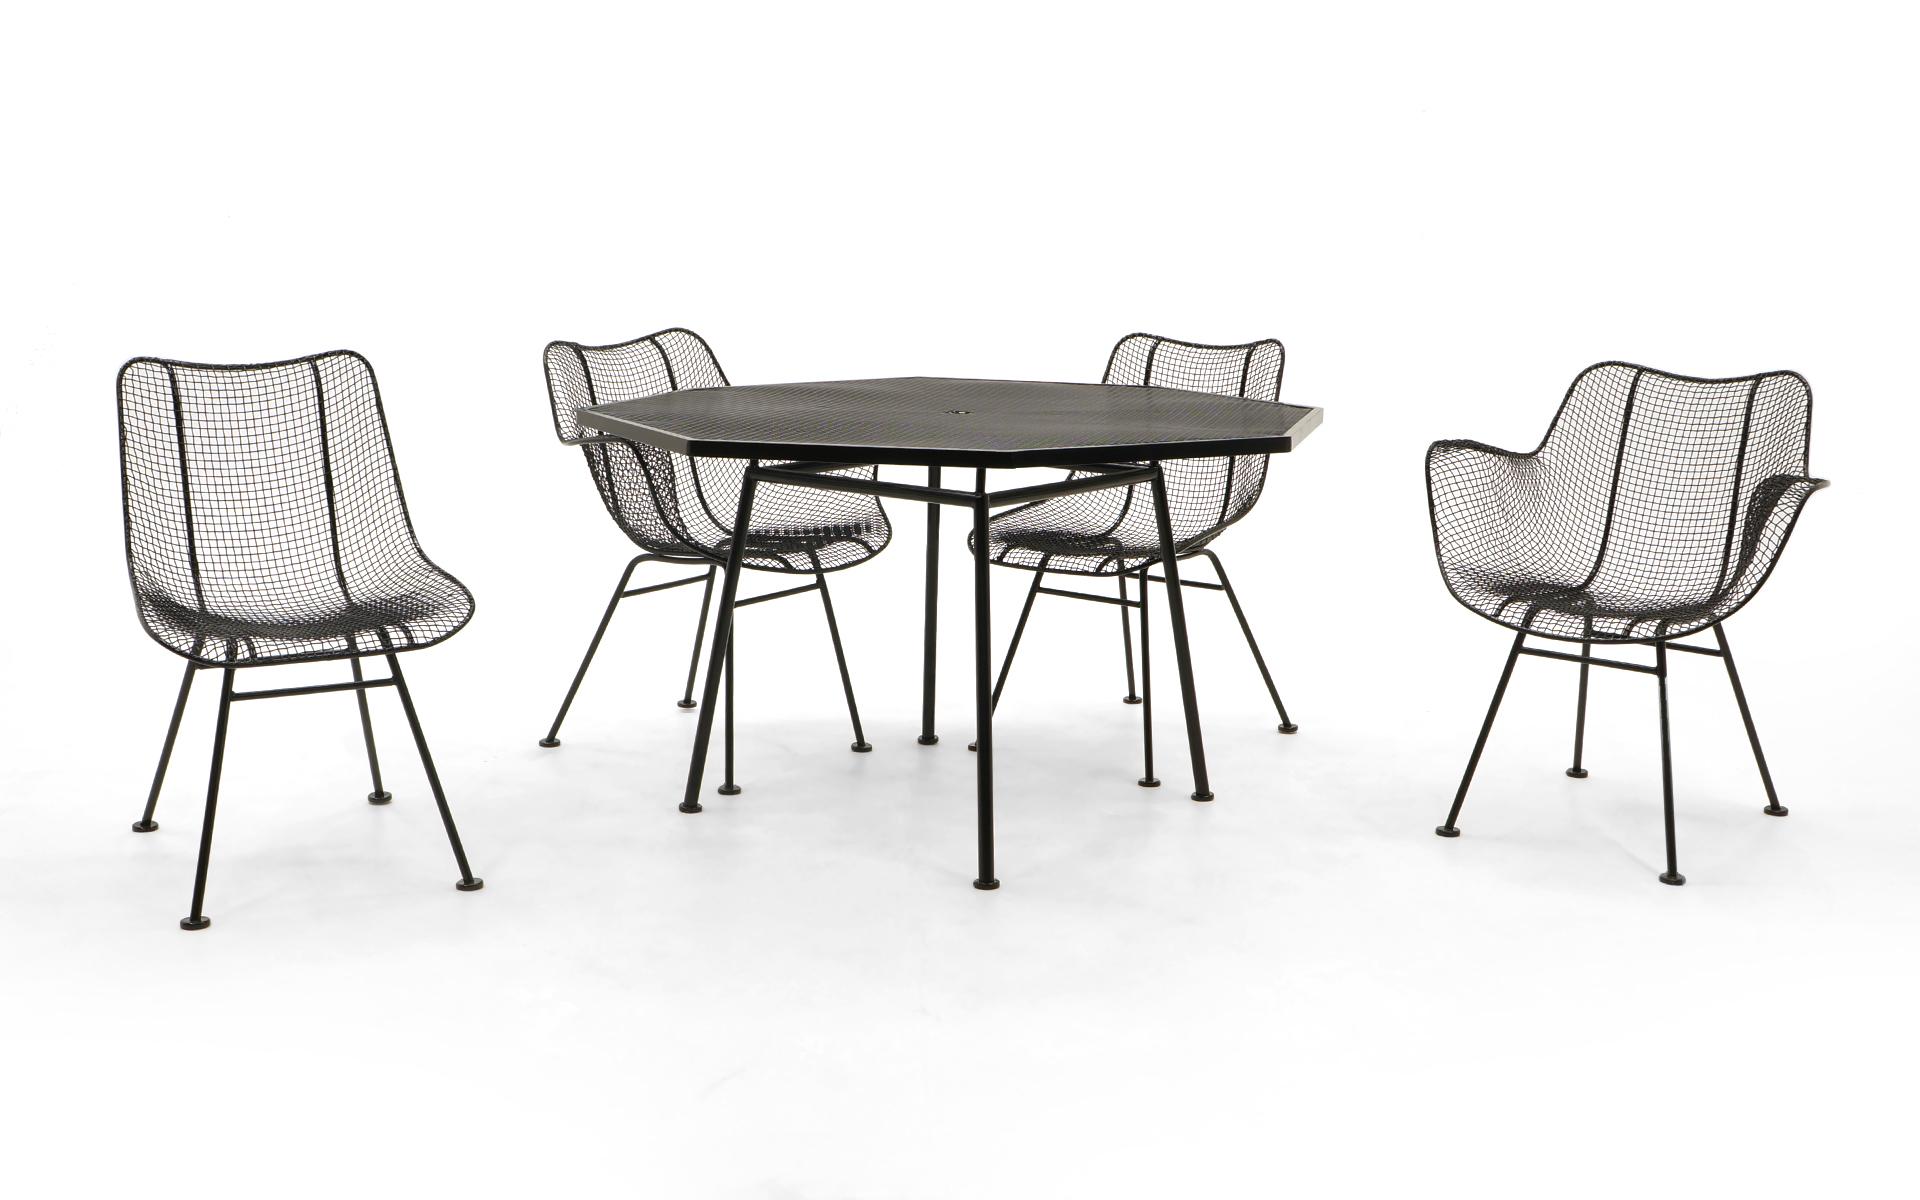 Octagonal Russell Woodard dining table with four woven wire sculptura dining chairs, two with arms, two armless. Professionally media blasted and powder coated in a satin black finish. Never outdoors since restoration.
Measurements:
Table: 28.5